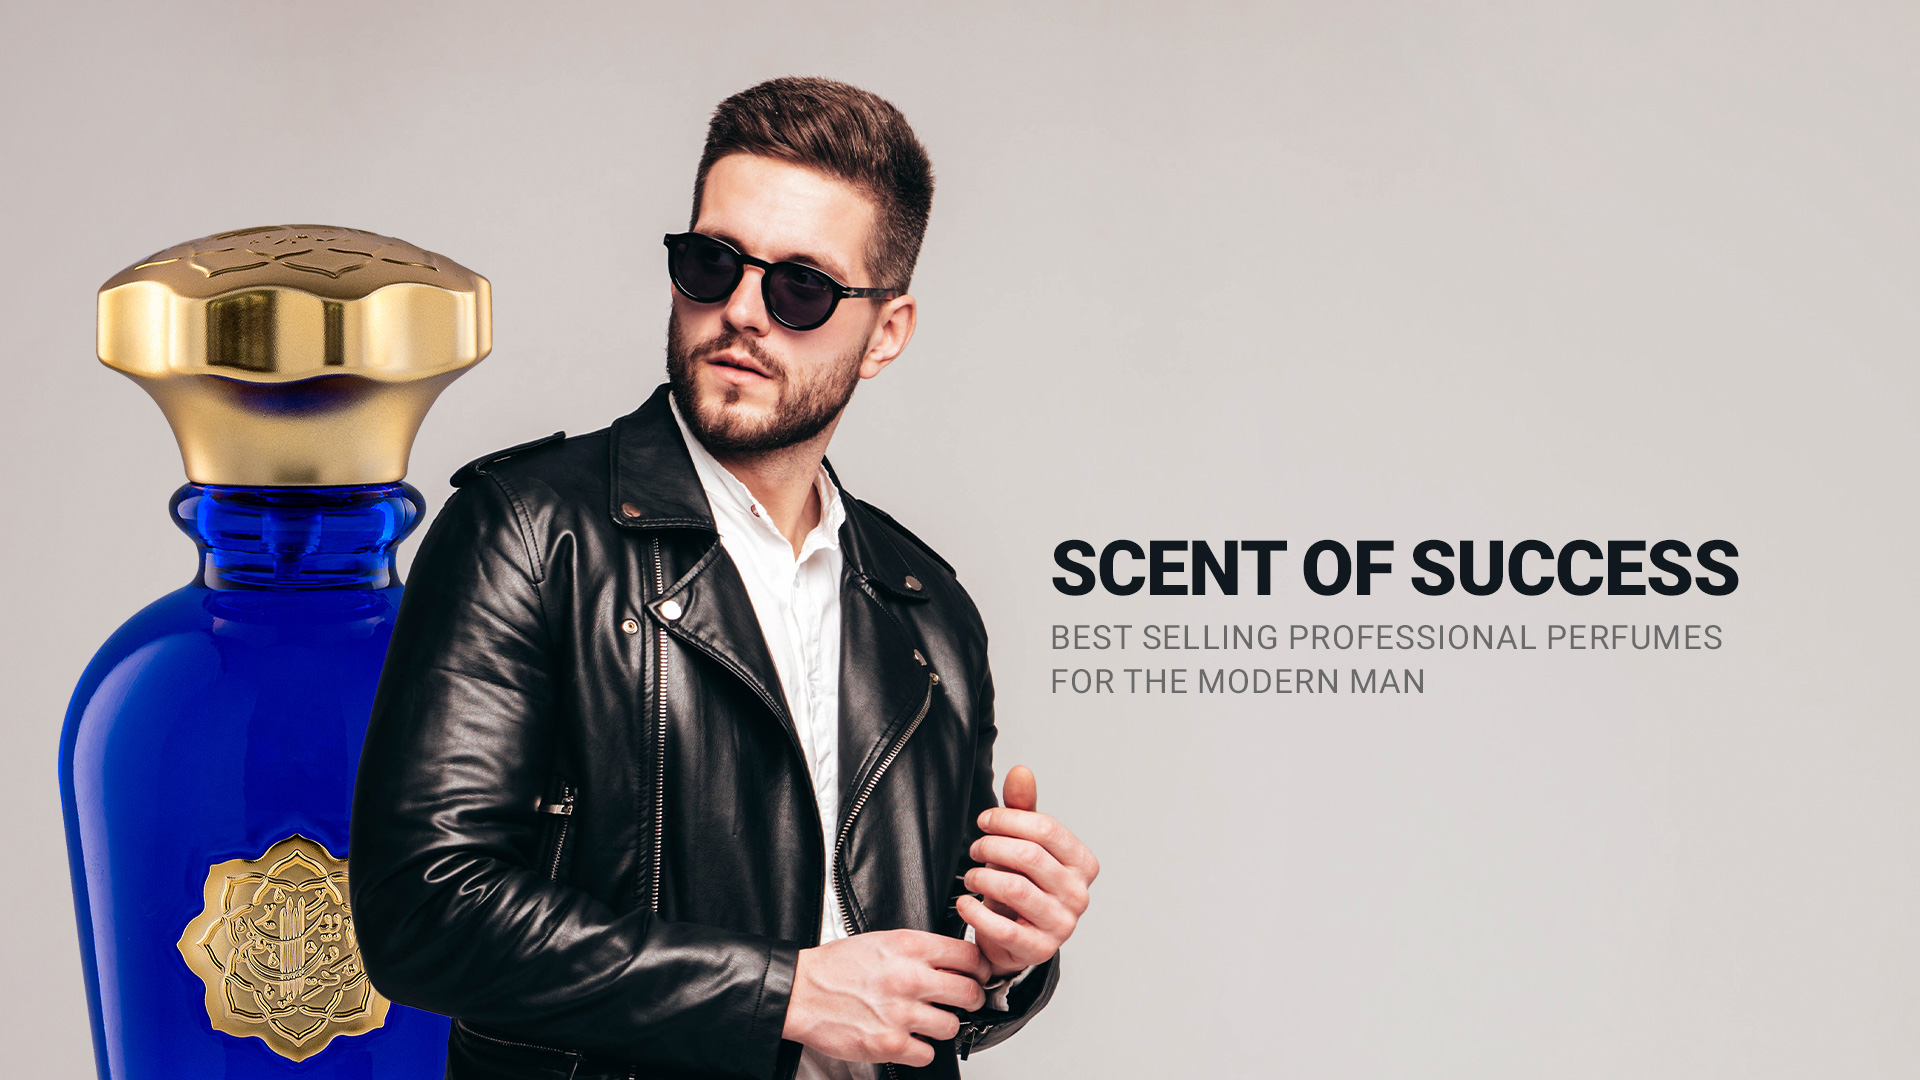 Scent of Success: Best Selling Professional Perfumes for the Modern Man ​